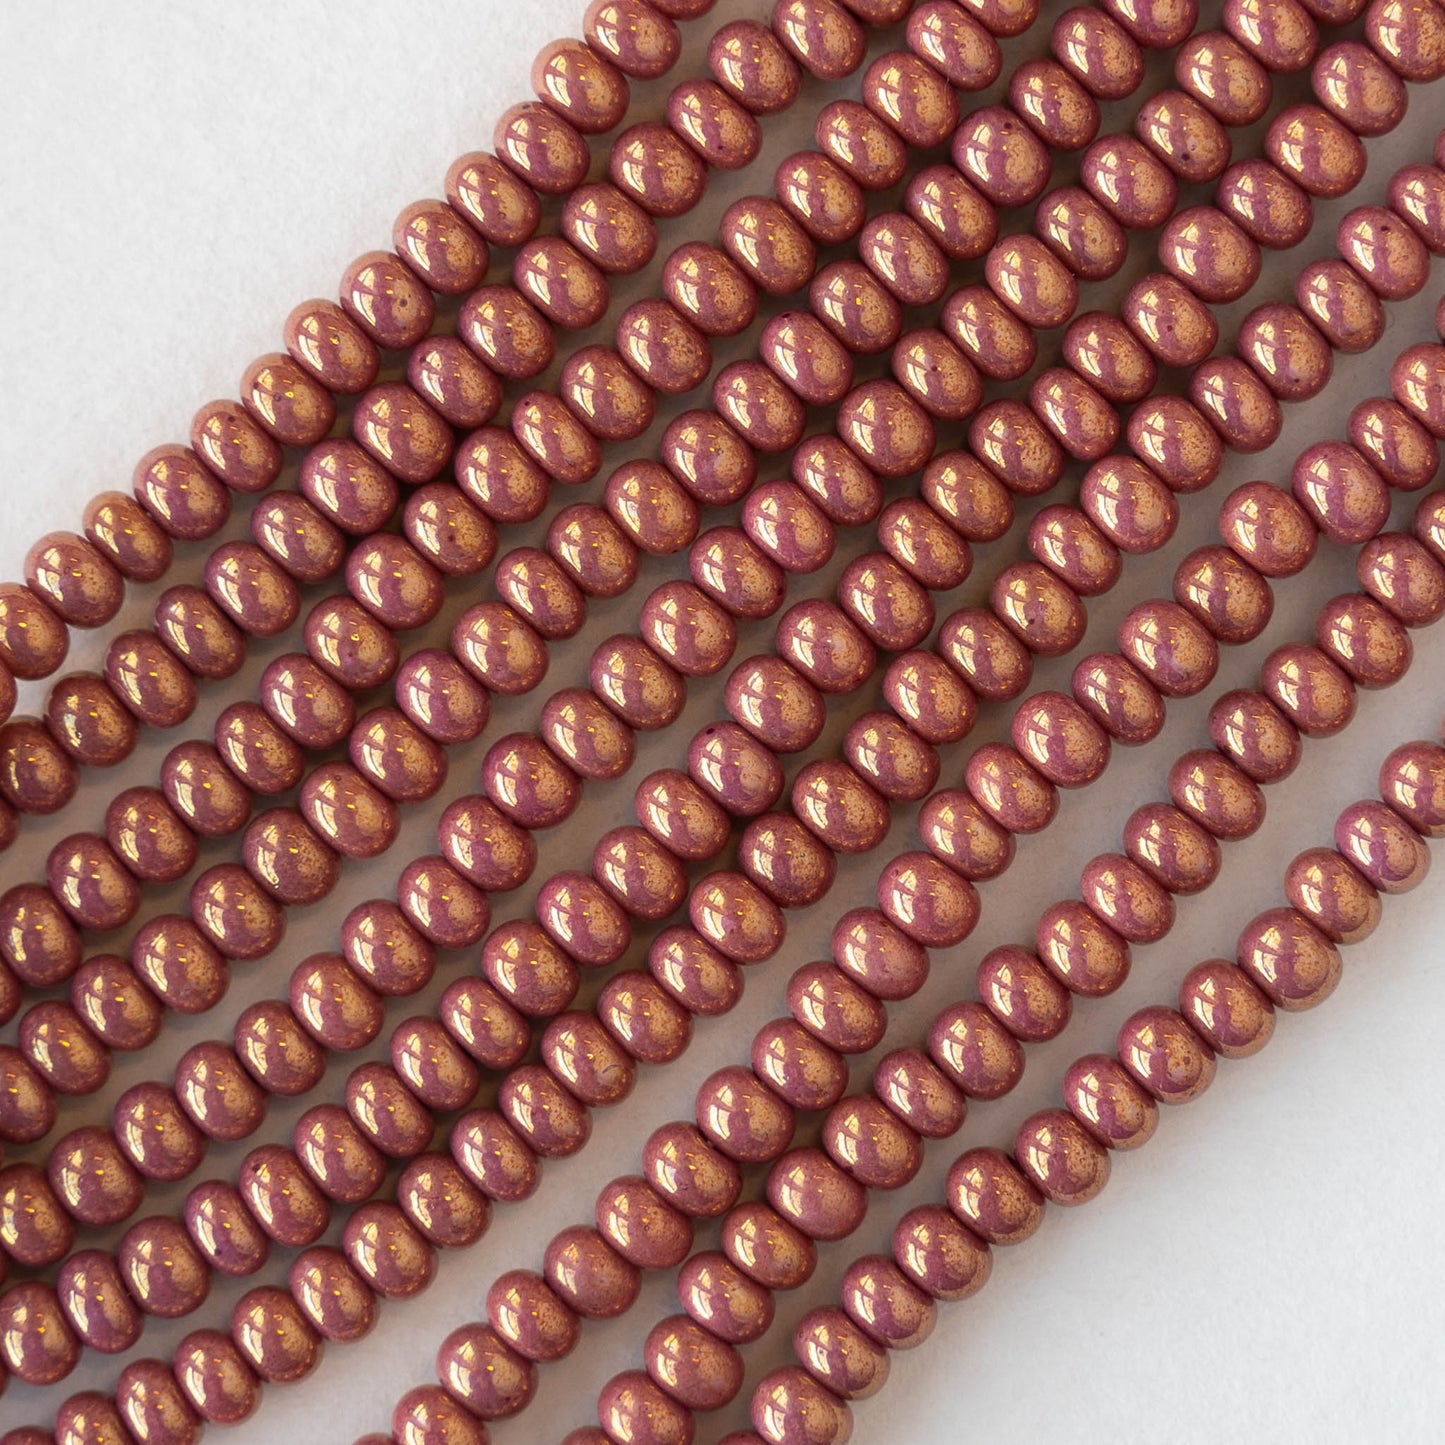 Size 6 Seed Bead Mix - Rusty Copper Luster - 20 inches